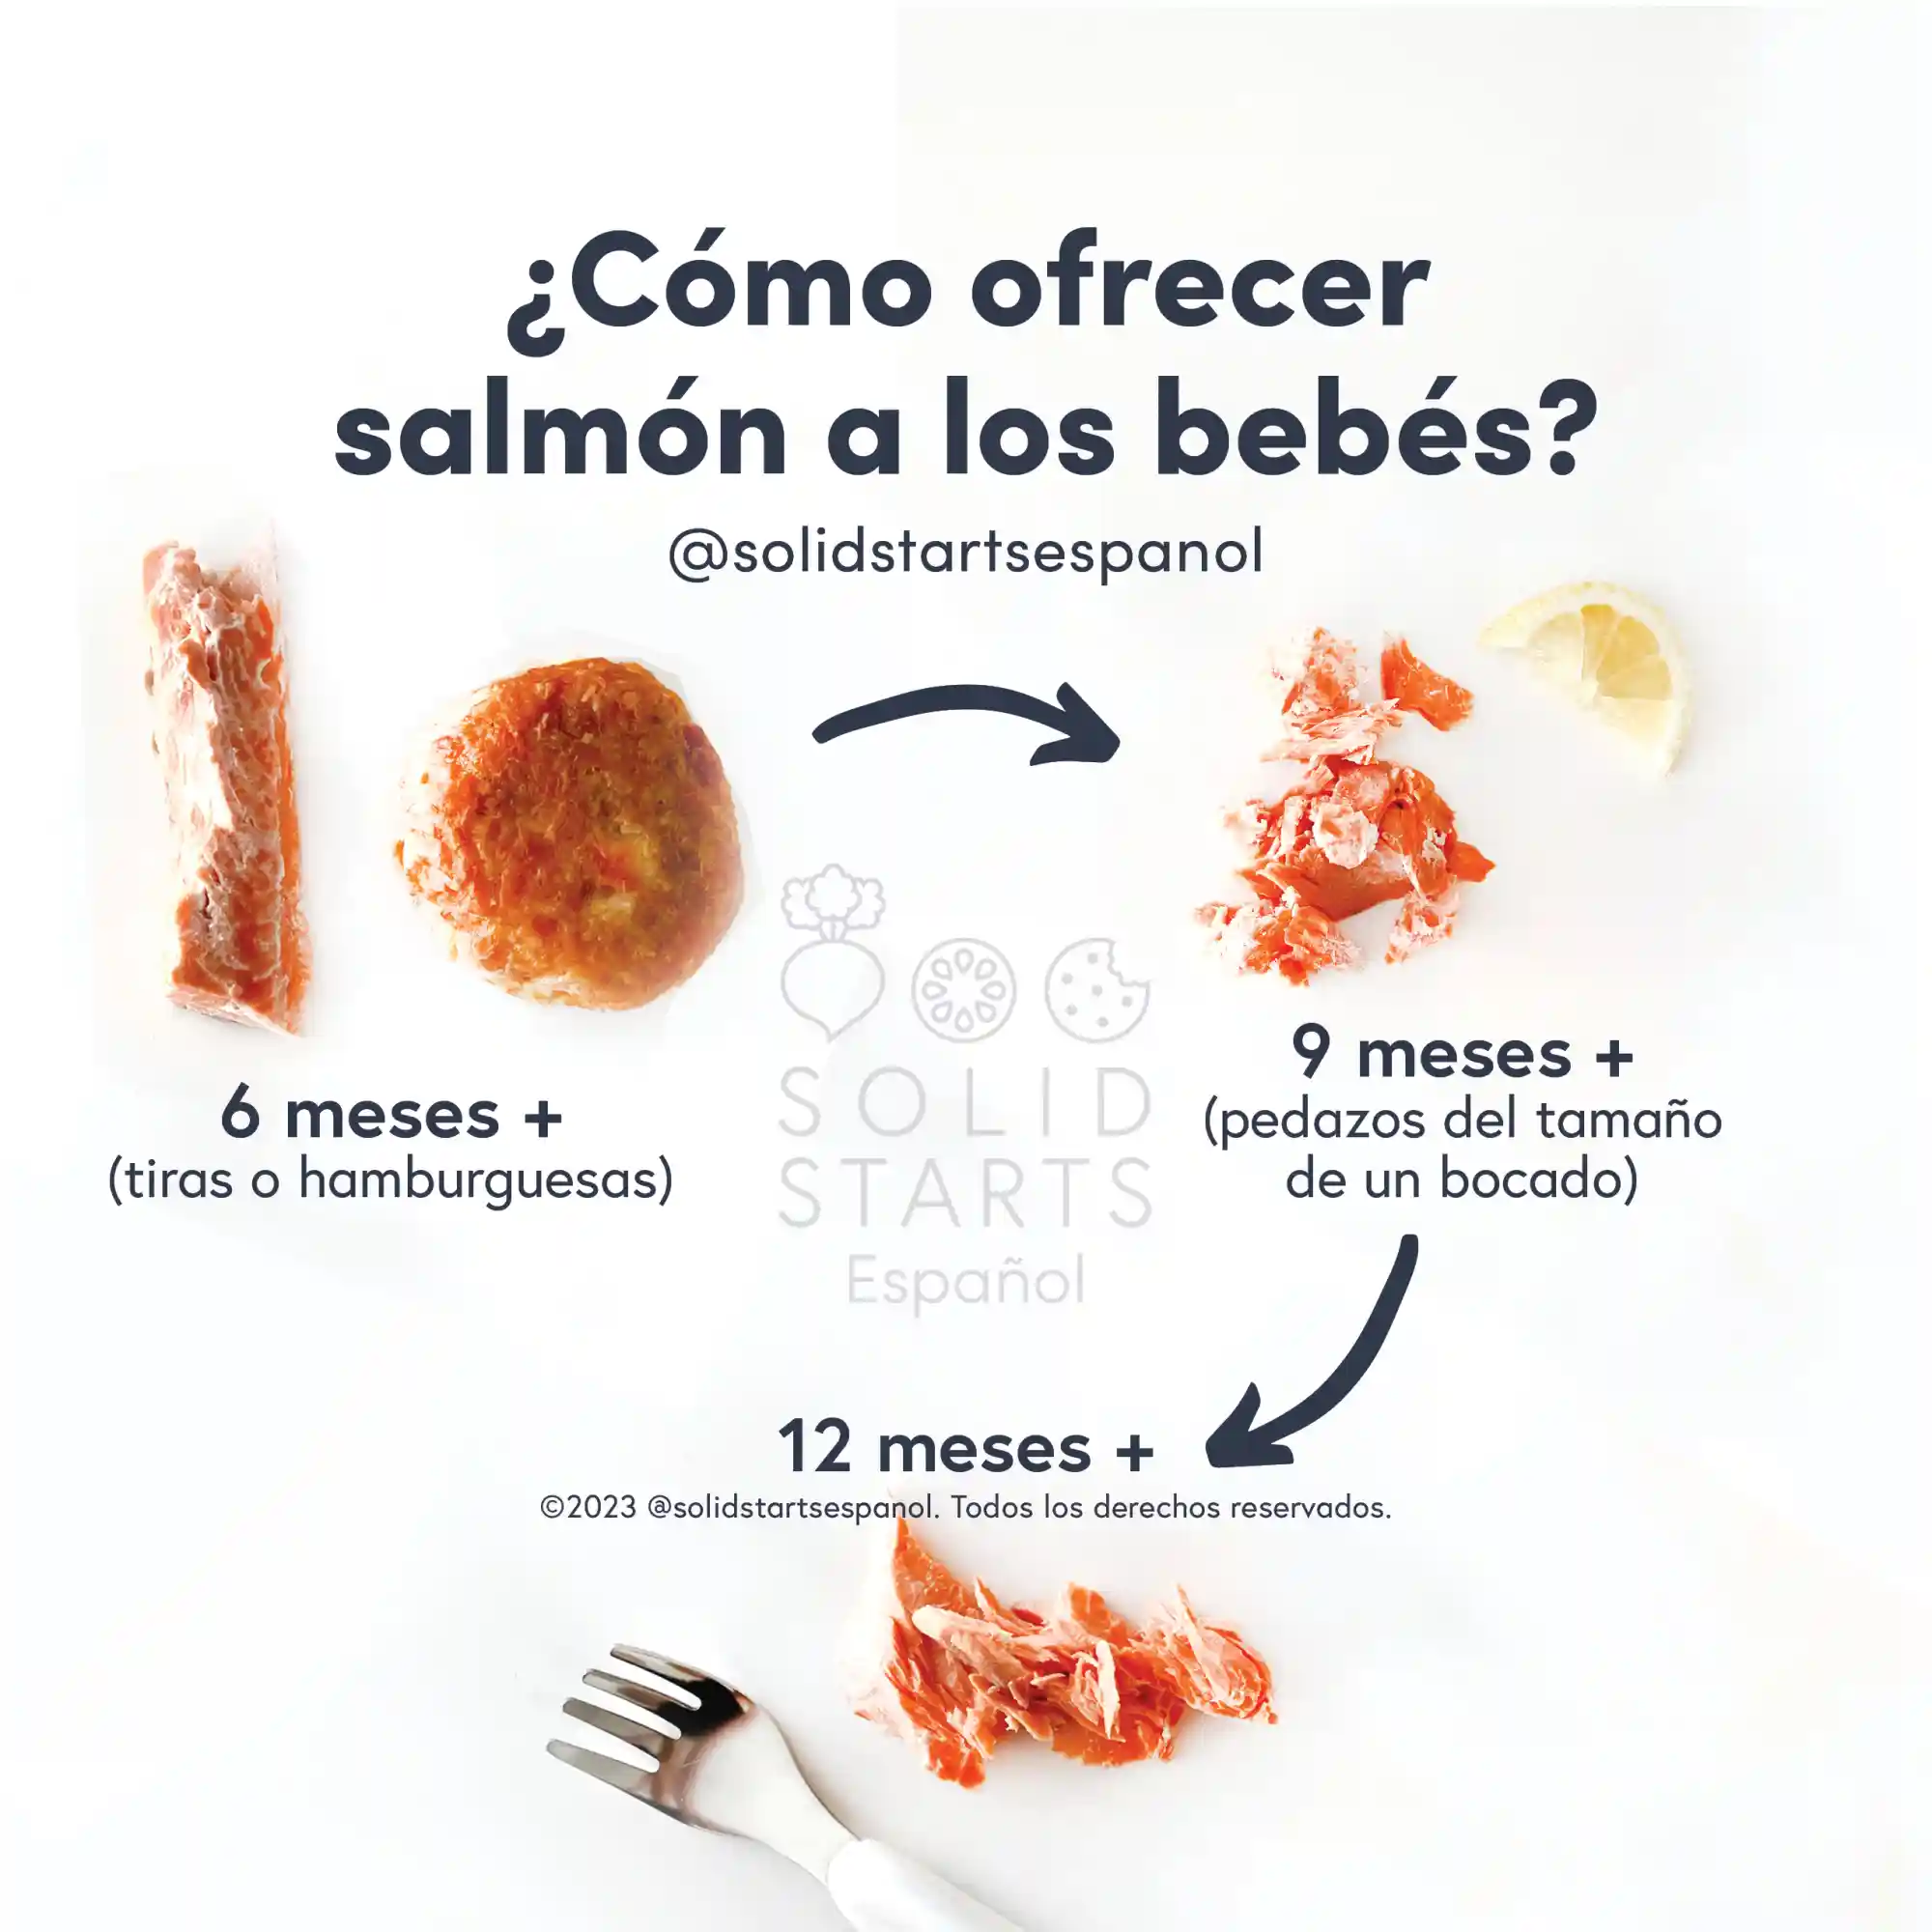 infographic showing how to serve salmon to babies by age. Images showing salmon strips for 6-12 months, bite sized salmon pieces and a salmon patty for 12-18 months, and salmon pieces next to a fork for 18 months+